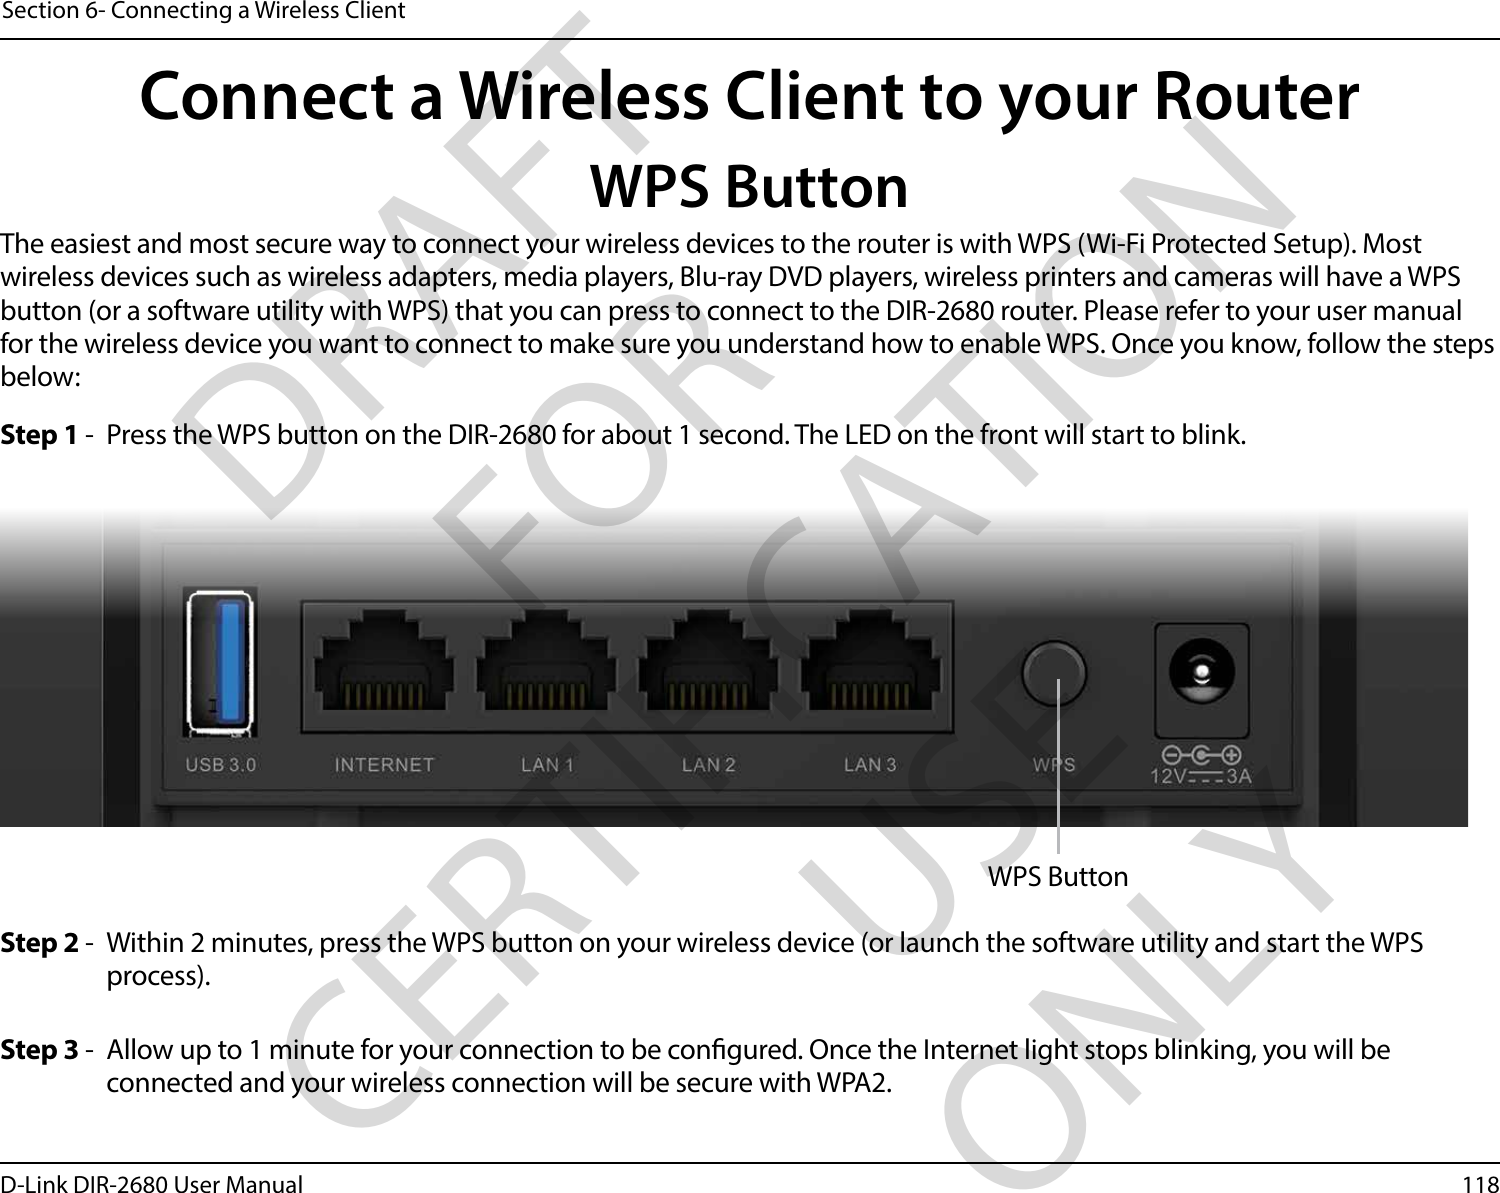 118D-Link DIR-2680 User ManualSection 6- Connecting a Wireless ClientConnect a Wireless Client to your RouterWPS ButtonStep 2 -  Within 2 minutes, press the WPS button on your wireless device (or launch the software utility and start the WPS process).The easiest and most secure way to connect your wireless devices to the router is with WPS (Wi-Fi Protected Setup). Most wireless devices such as wireless adapters, media players, Blu-ray DVD players, wireless printers and cameras will have a WPS button (or a software utility with WPS) that you can press to connect to the DIR-2680 router. Please refer to your user manual for the wireless device you want to connect to make sure you understand how to enable WPS. Once you know, follow the steps below:Step 1 -  Press the WPS button on the DIR-2680 for about 1 second. The LED on the front will start to blink.Step 3 -  Allow up to 1 minute for your connection to be congured. Once the Internet light stops blinking, you will be connected and your wireless connection will be secure with WPA2.WPS ButtonDRAFT FOR CERTIFICATION USE ONLY